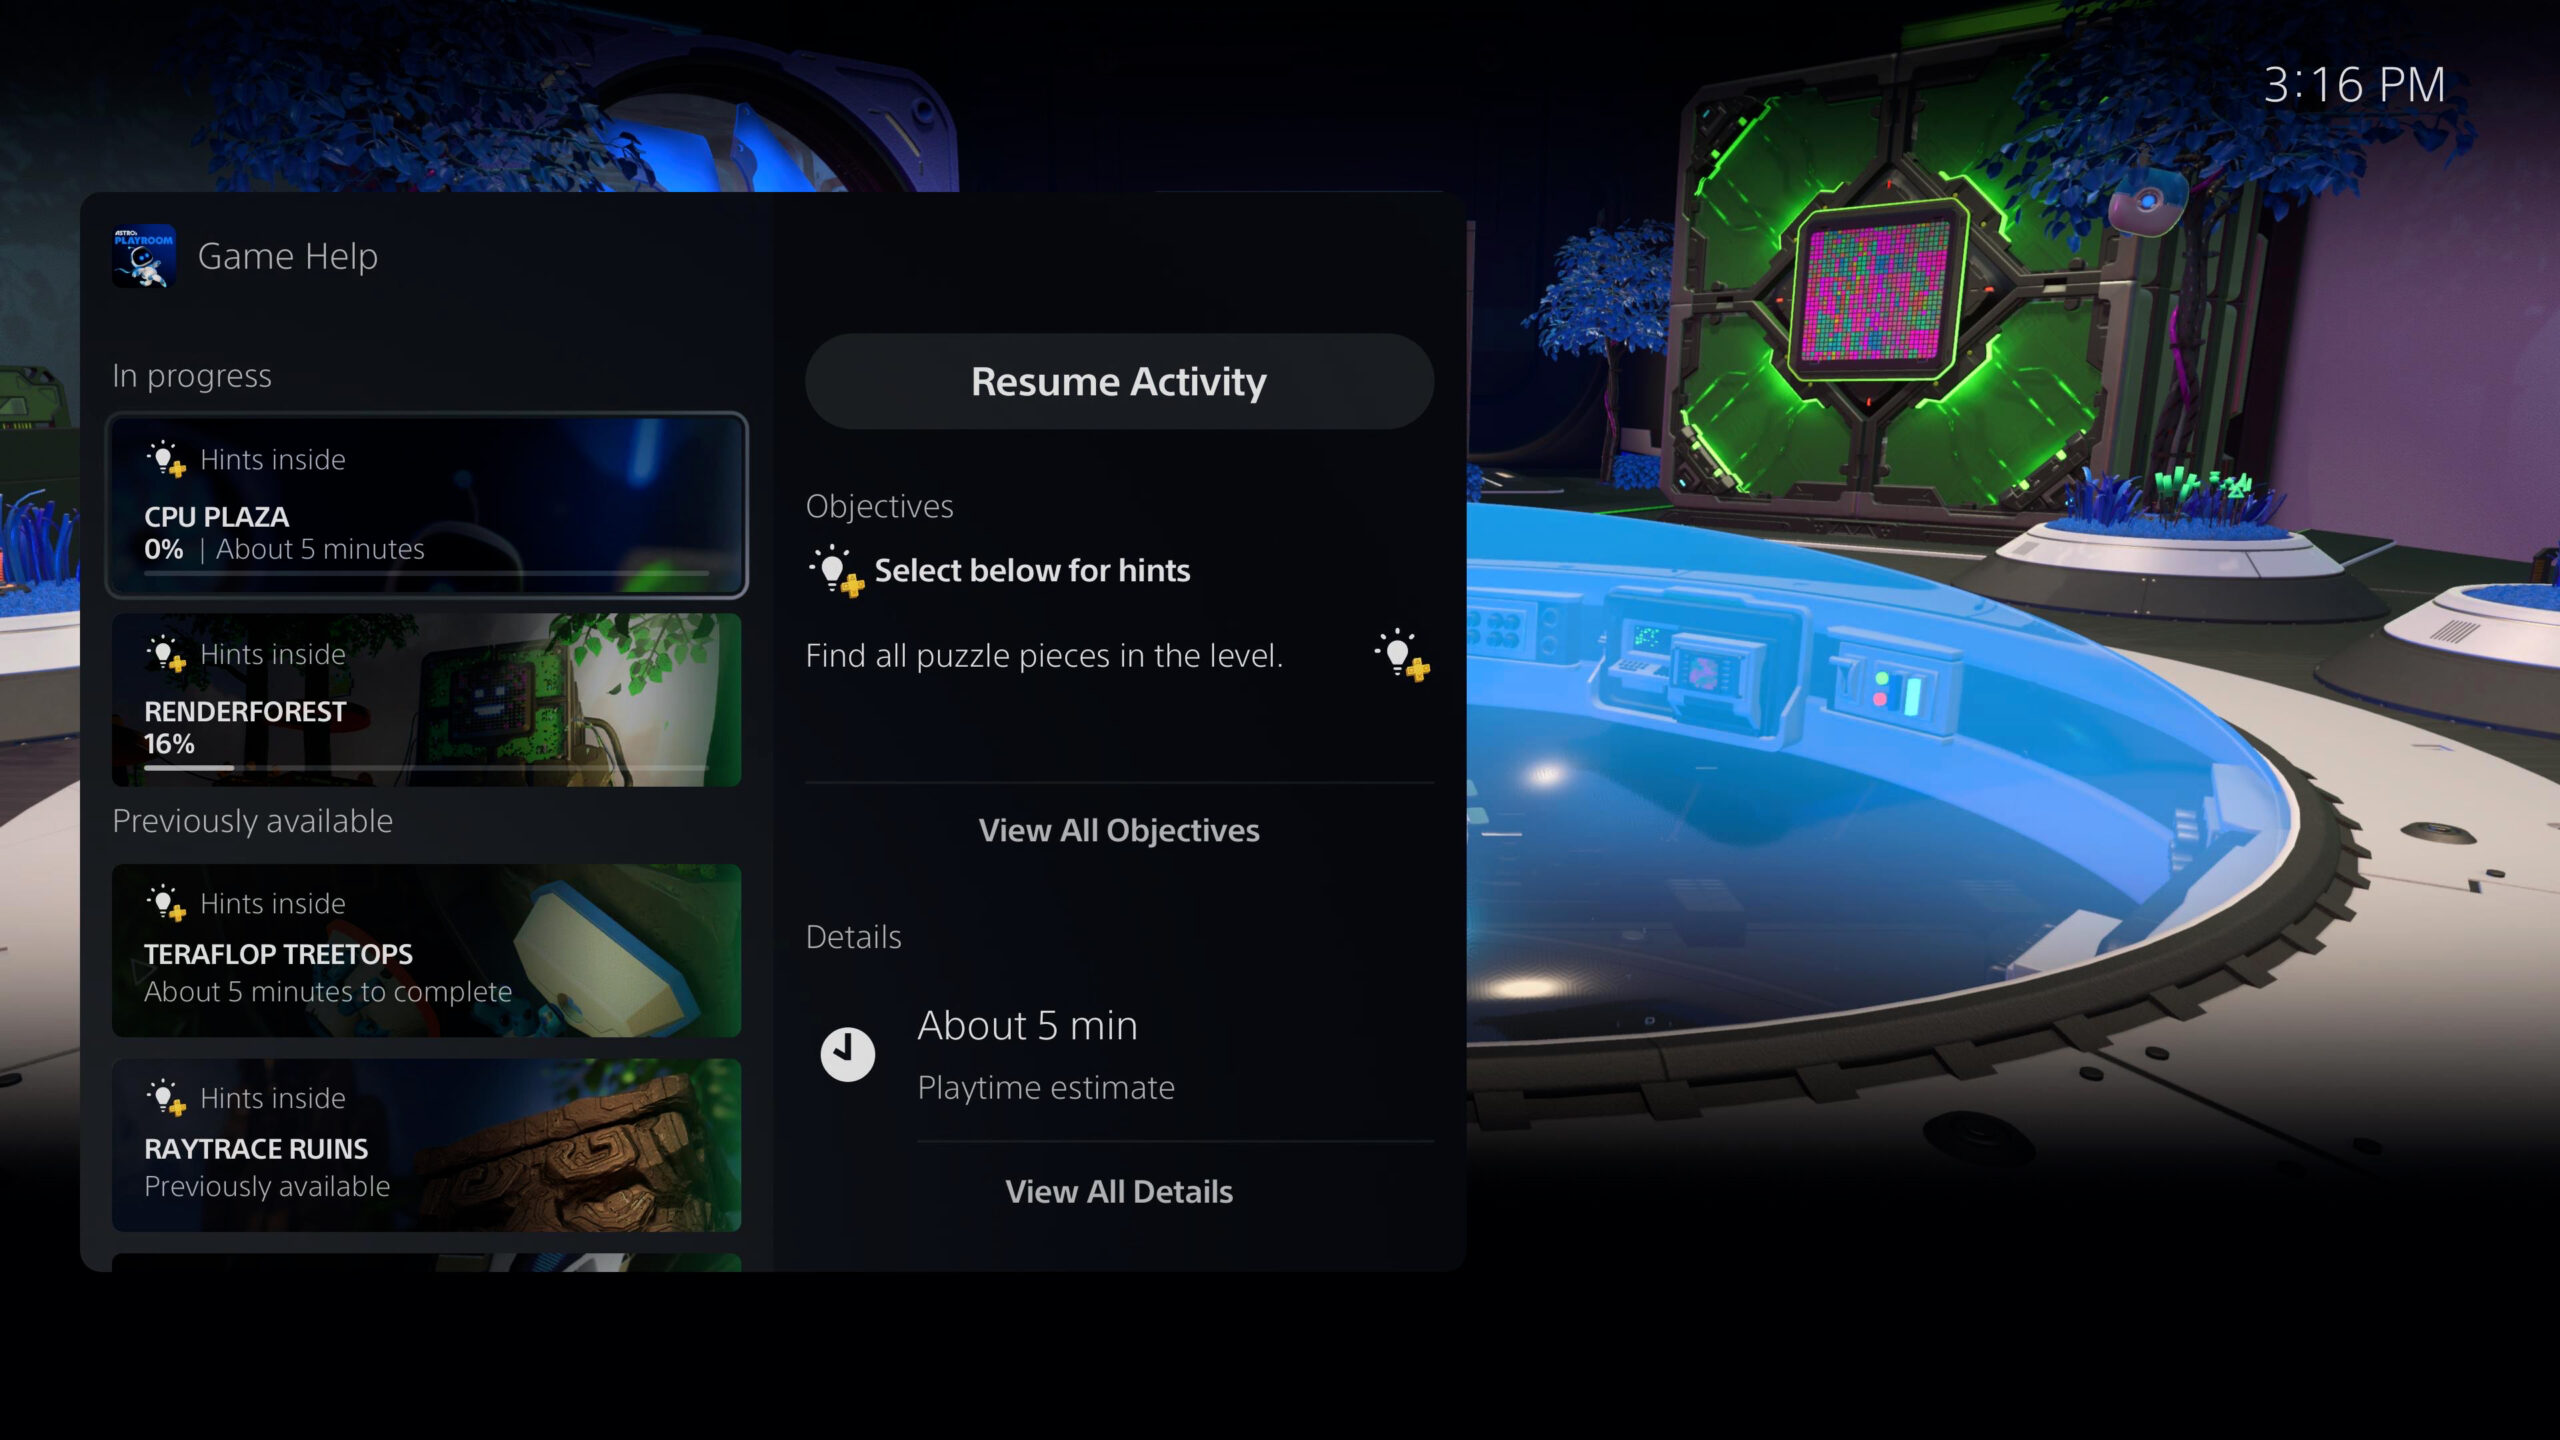  "PS5 UI screenshot of Game Help card showing additional details of the activity"